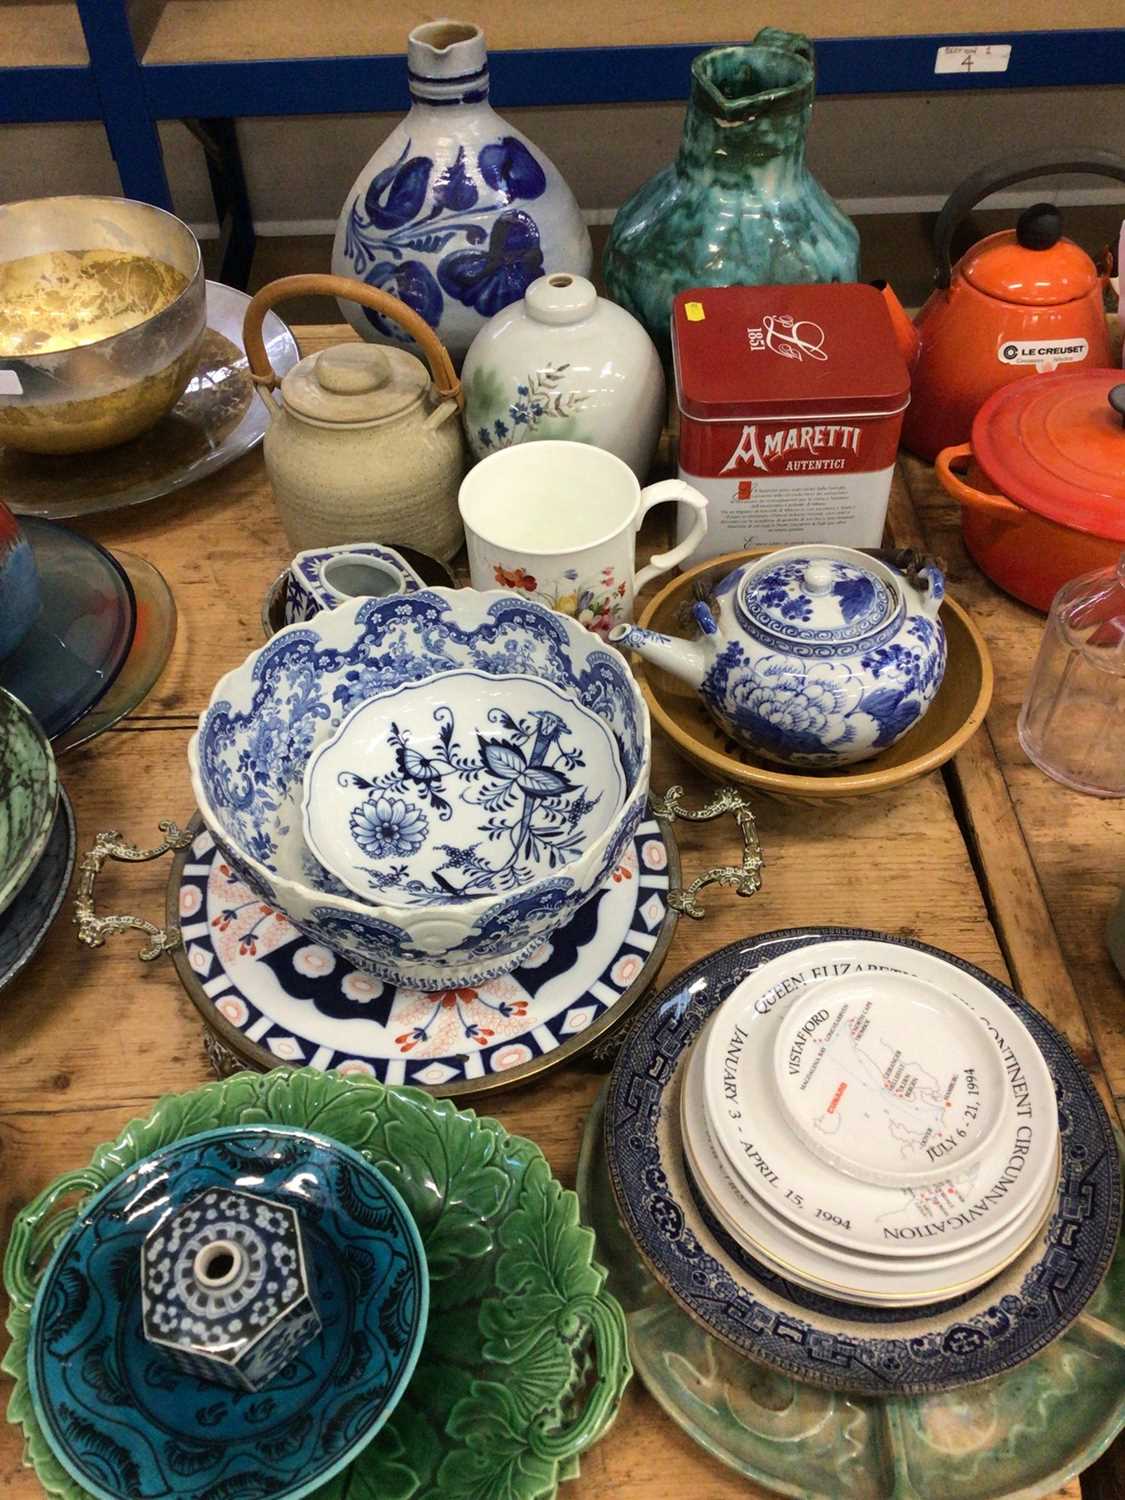 Lot 23 - Group of ceramics and glassware, including green majolica dishes, an Imari serving dish, etc